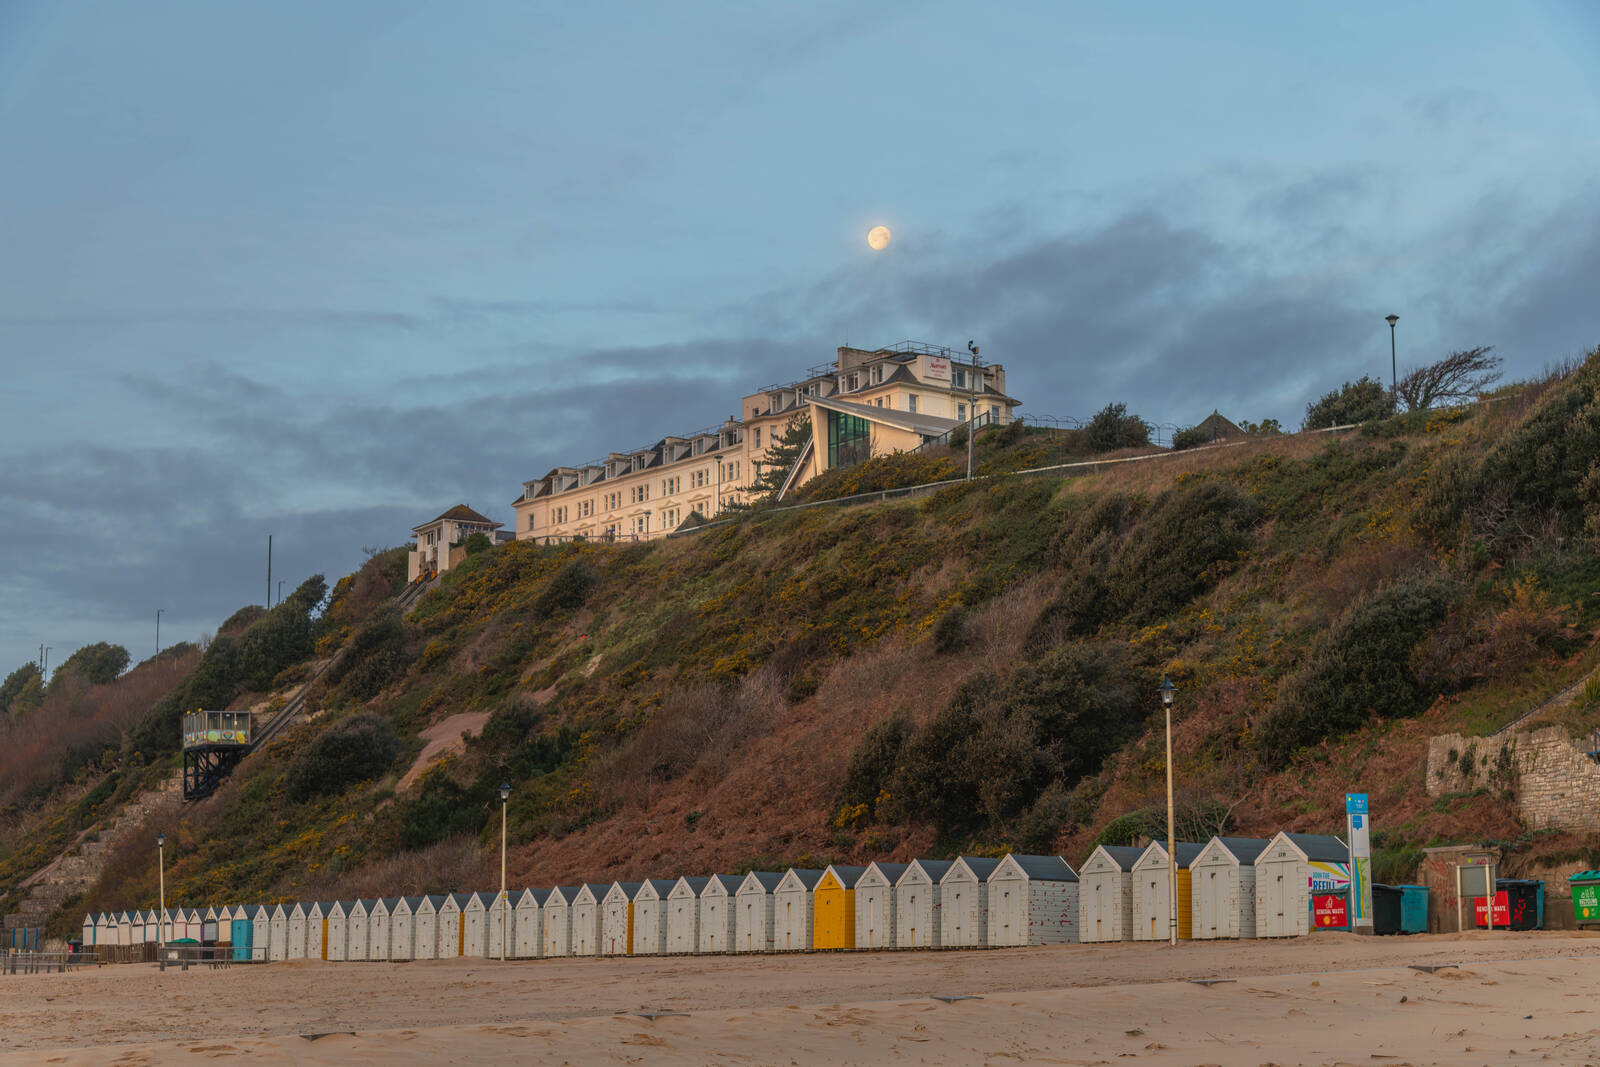 Image of Marriott Hotel from Bournemouth Beach by michael bennett